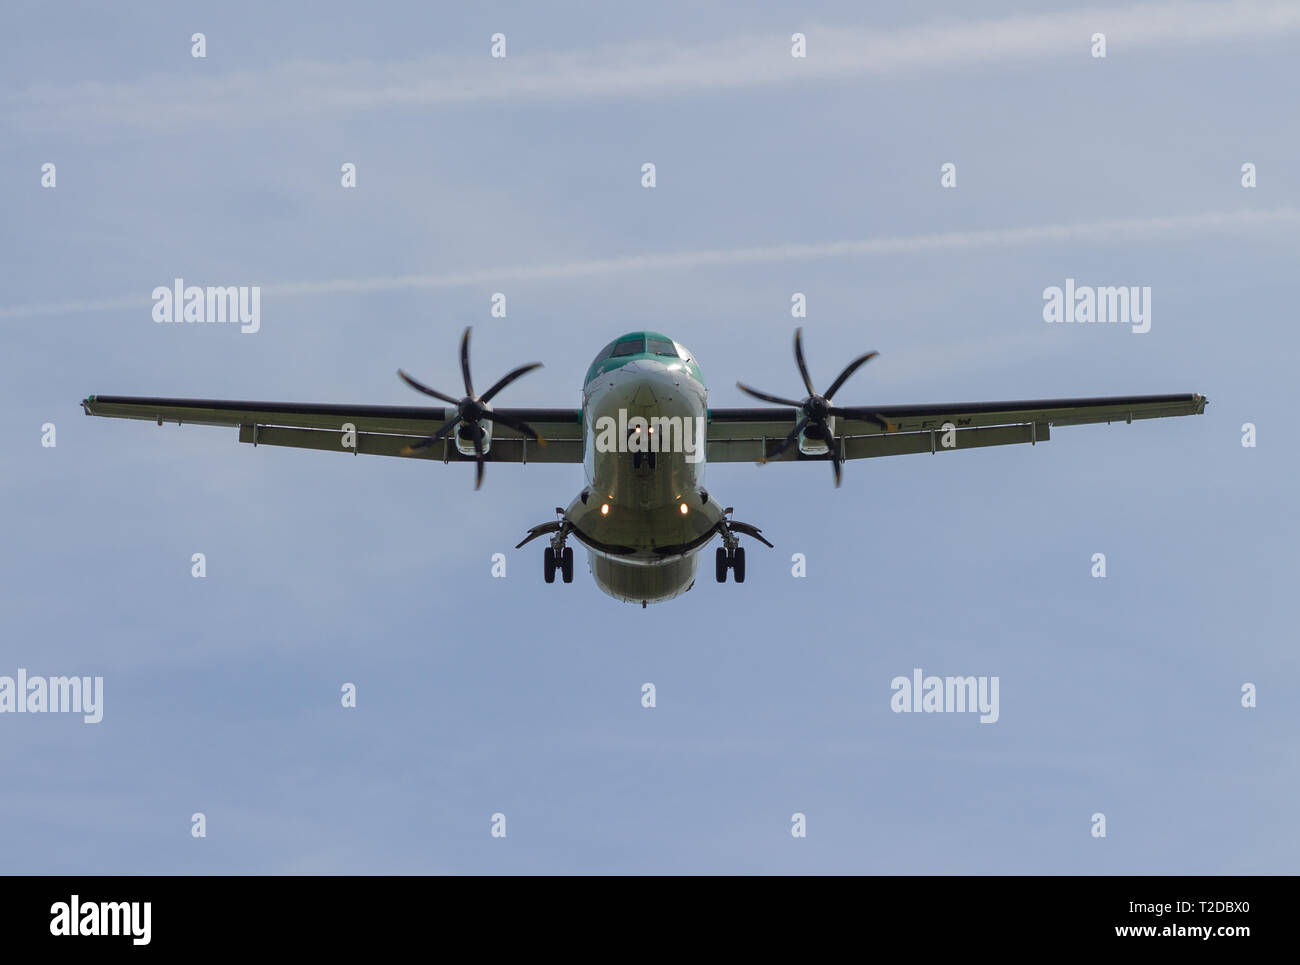 Air Lingus ATR Turbo Prop plane landing with landing gear down and flaps extended at Cork Airport Stock Photo